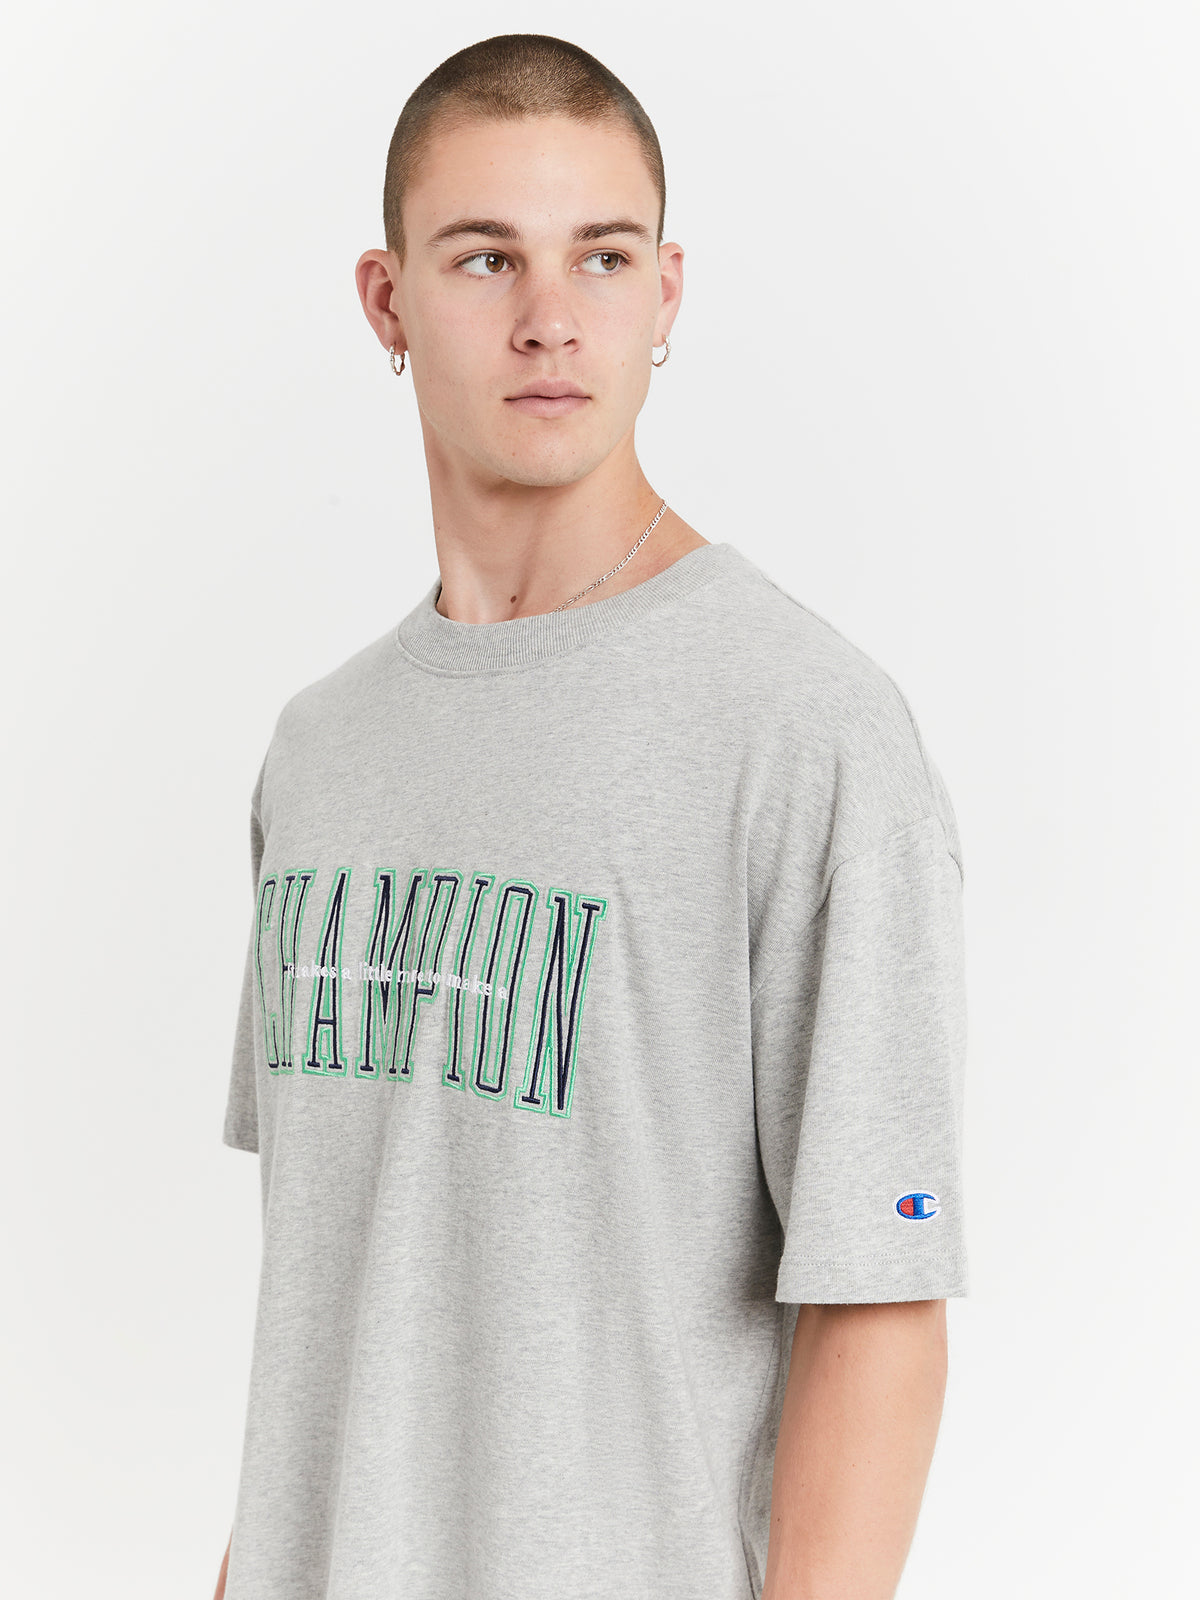 Heritage 90s Logo T-Shirt in Oxford Heather